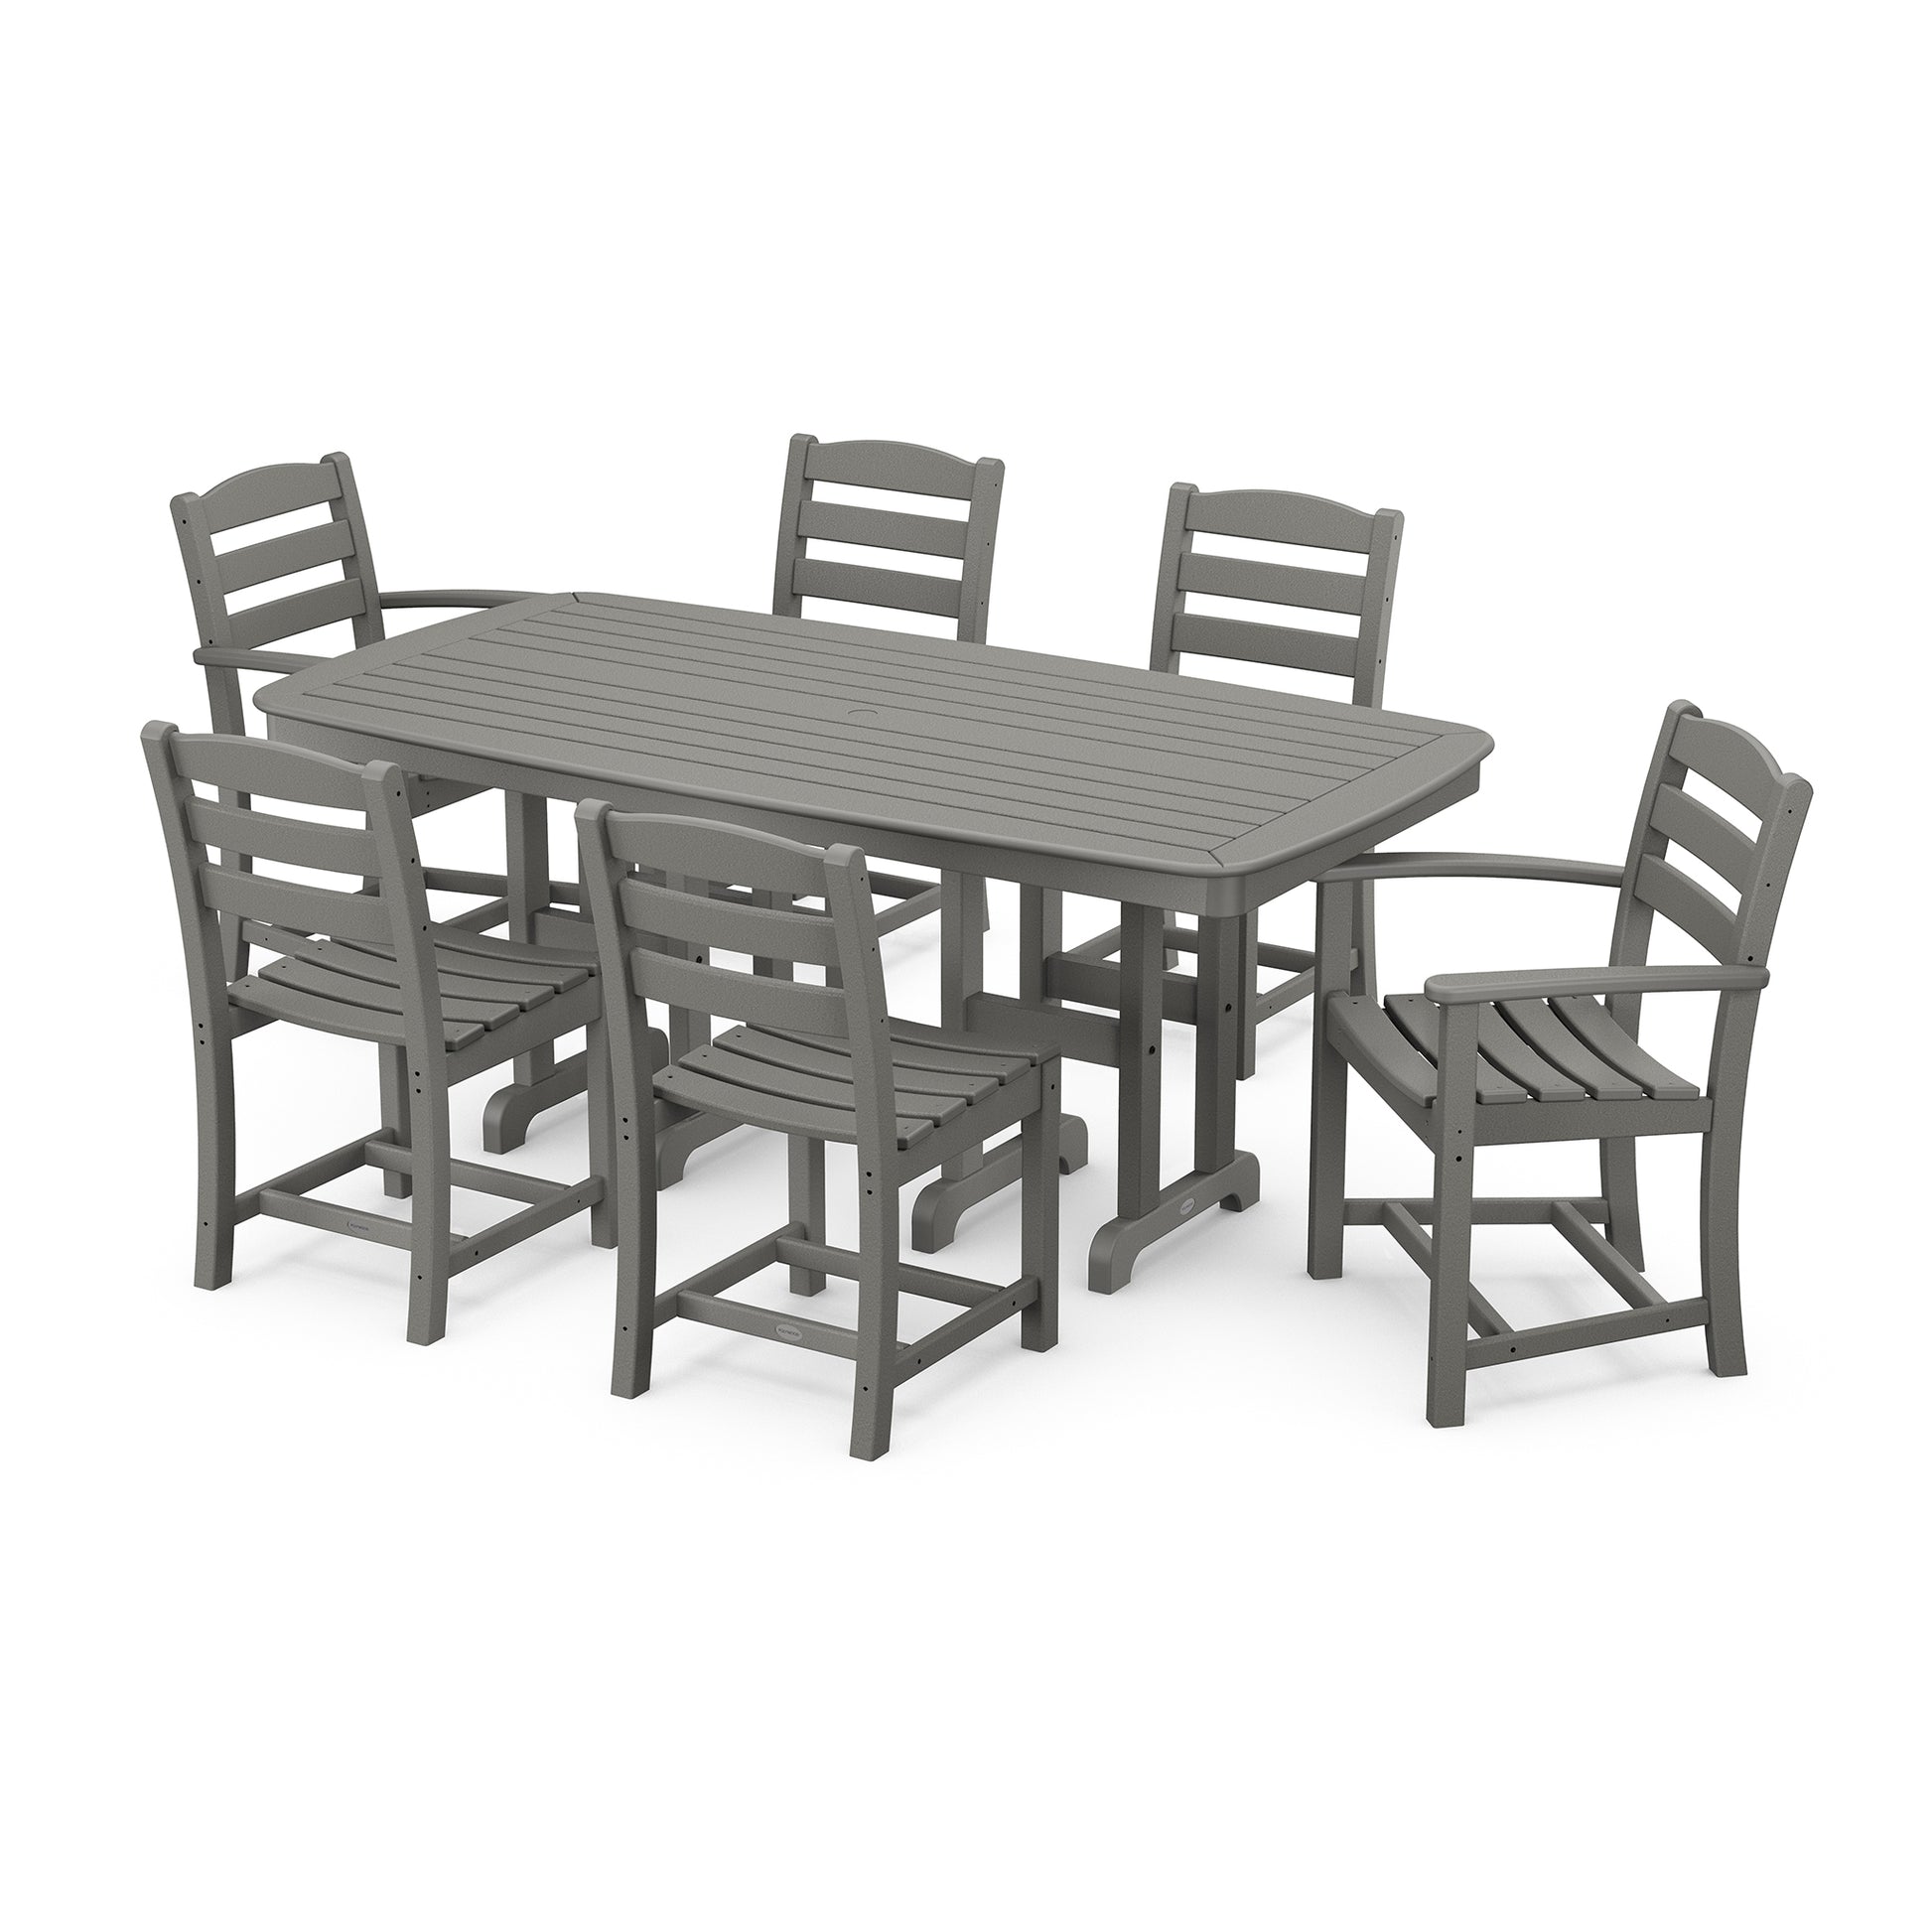 A modern POLYWOOD® La Casa Cafe 7-Piece Dining Set consisting of a rectangular gray table and six matching chairs with armrests, set on a white background.